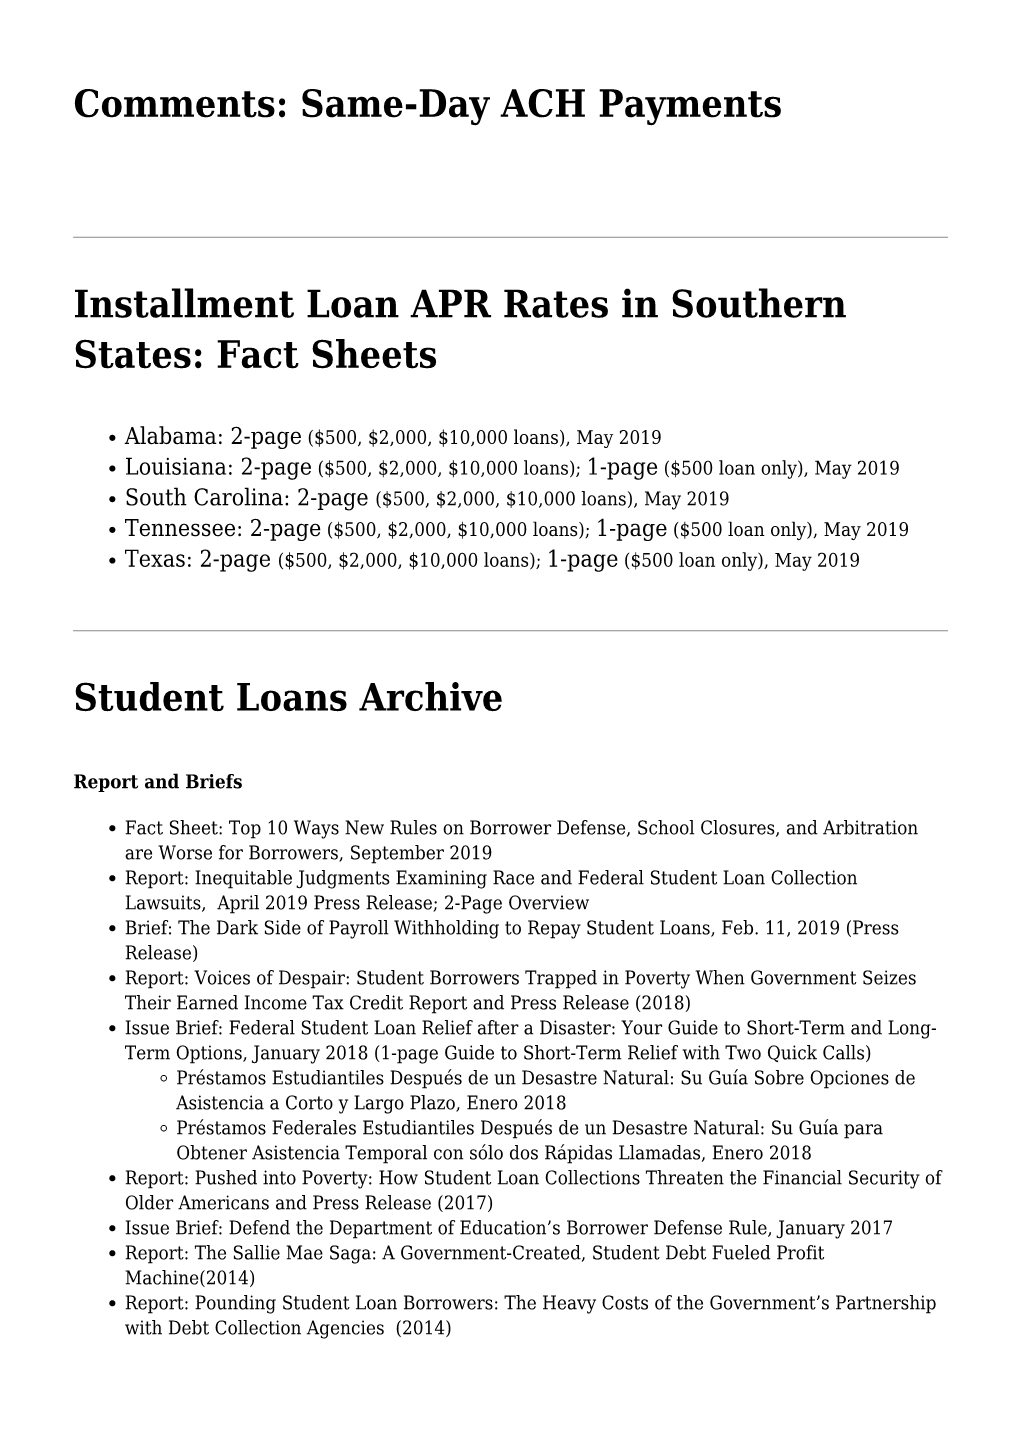 Fact Sheets,Student Loans Archive,For-Profit